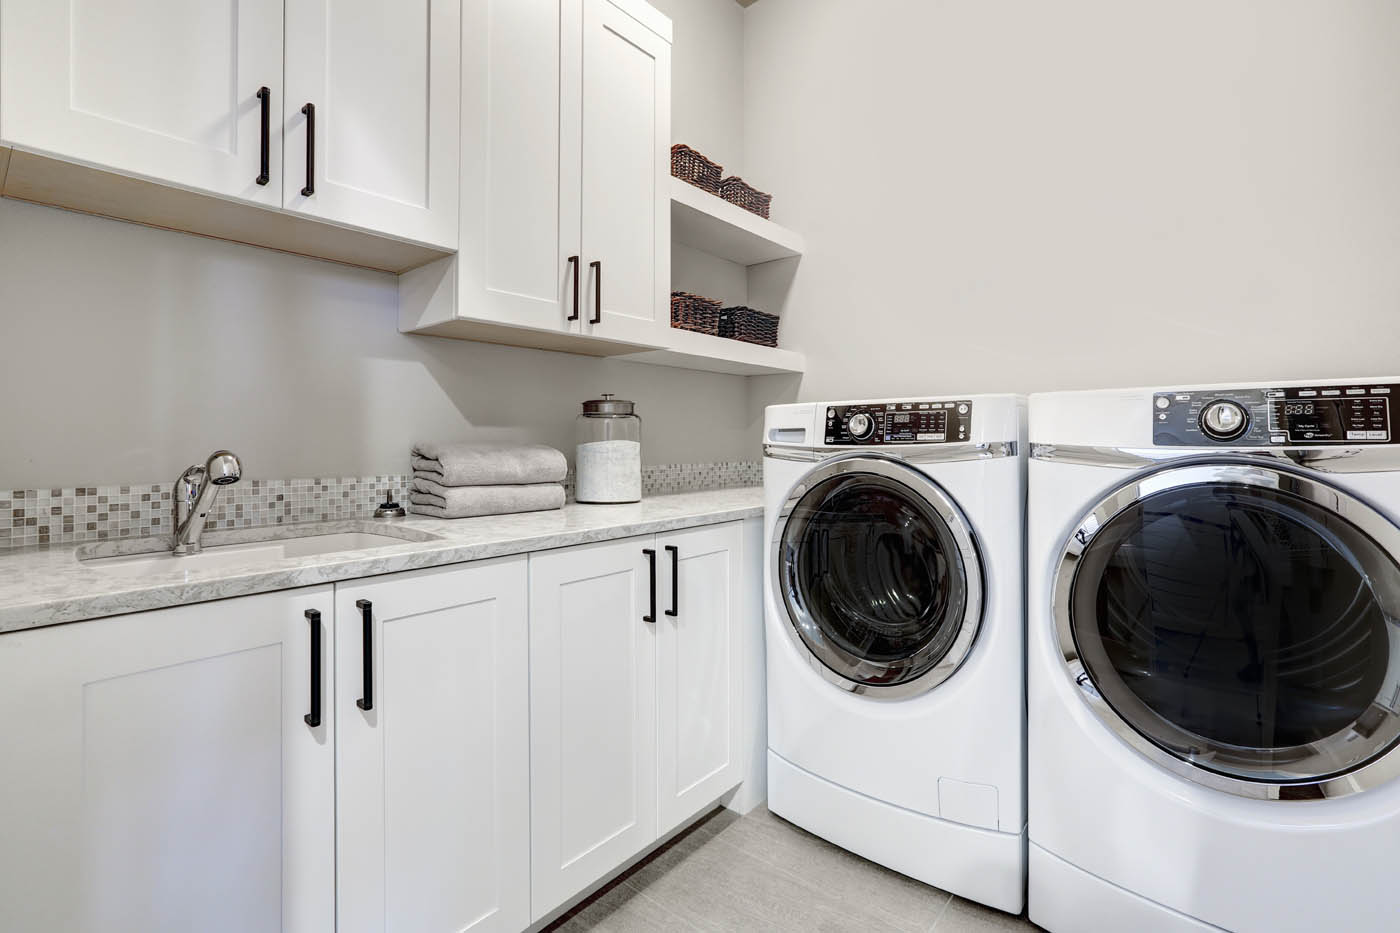 A picture of a laundry room inside a home, WyattWorks Charlotte.